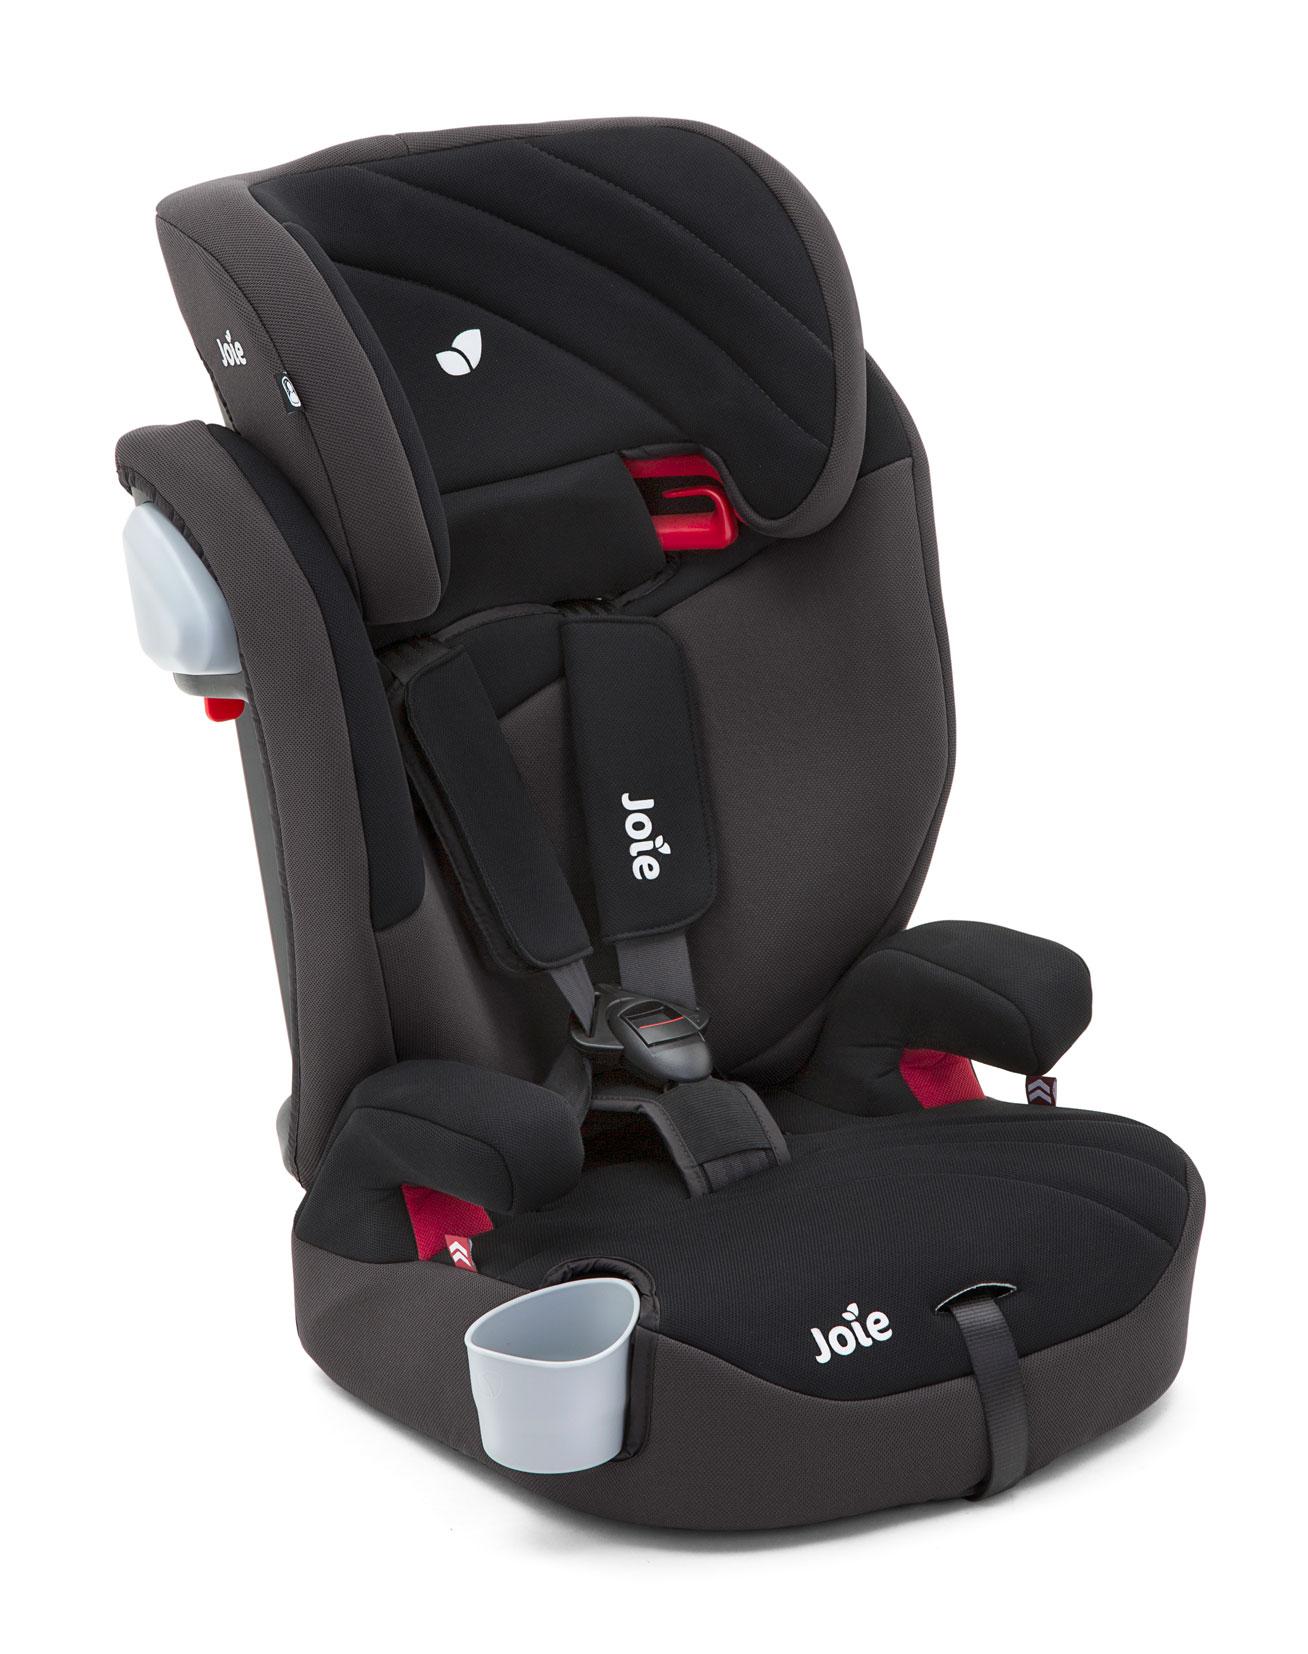 Joie Car Seat, Elevate 2.0, Two Tone Black, Group 1/2/3, 1 - 12years